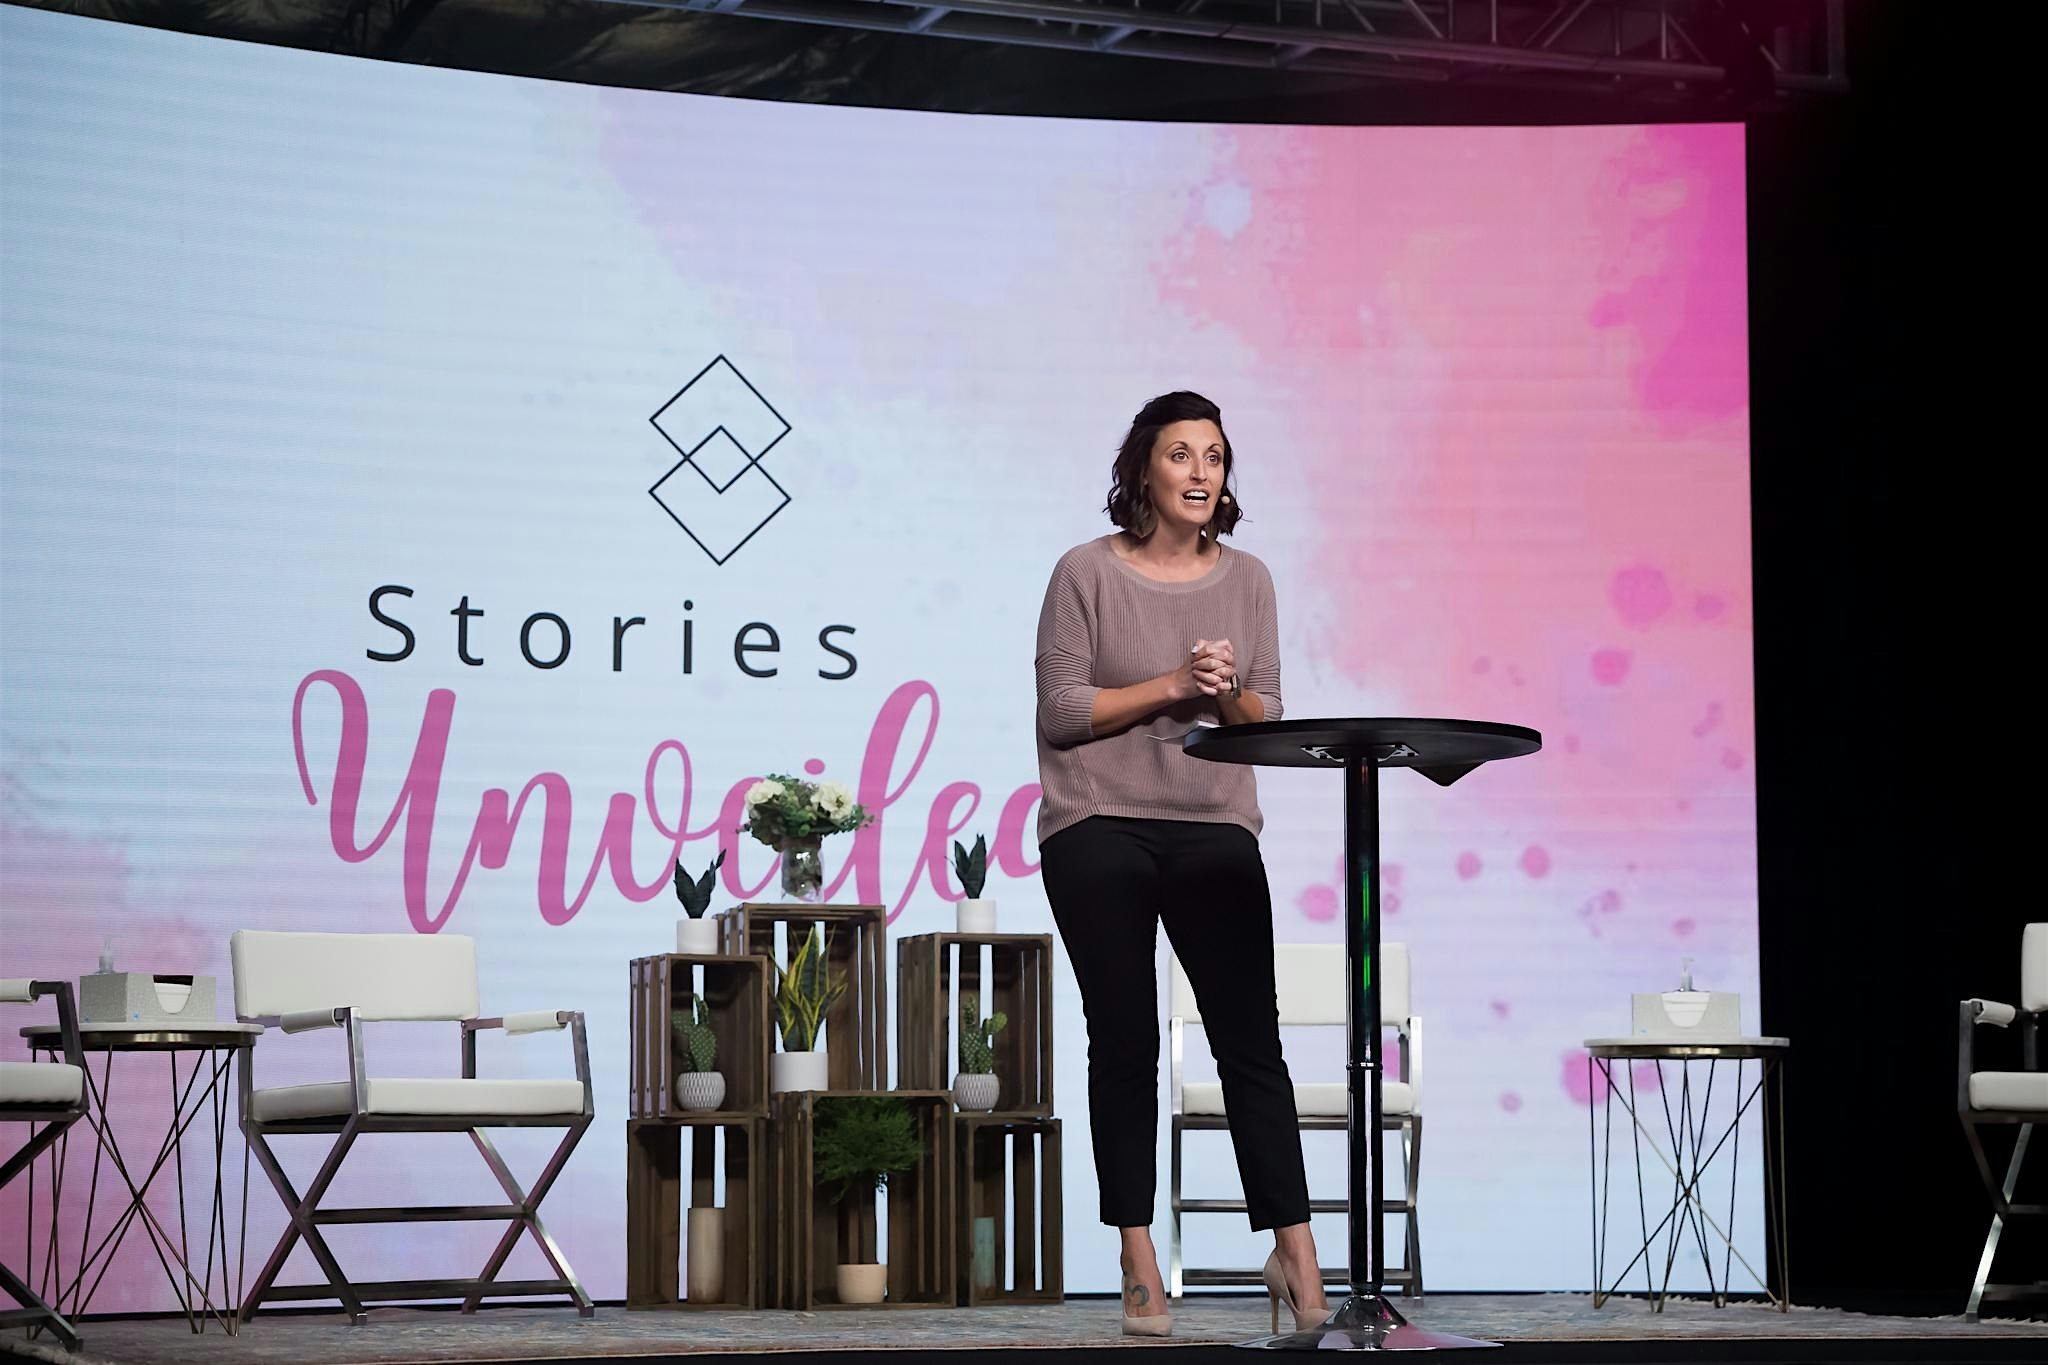 Ashley Sears with Stories Unveiled LLC